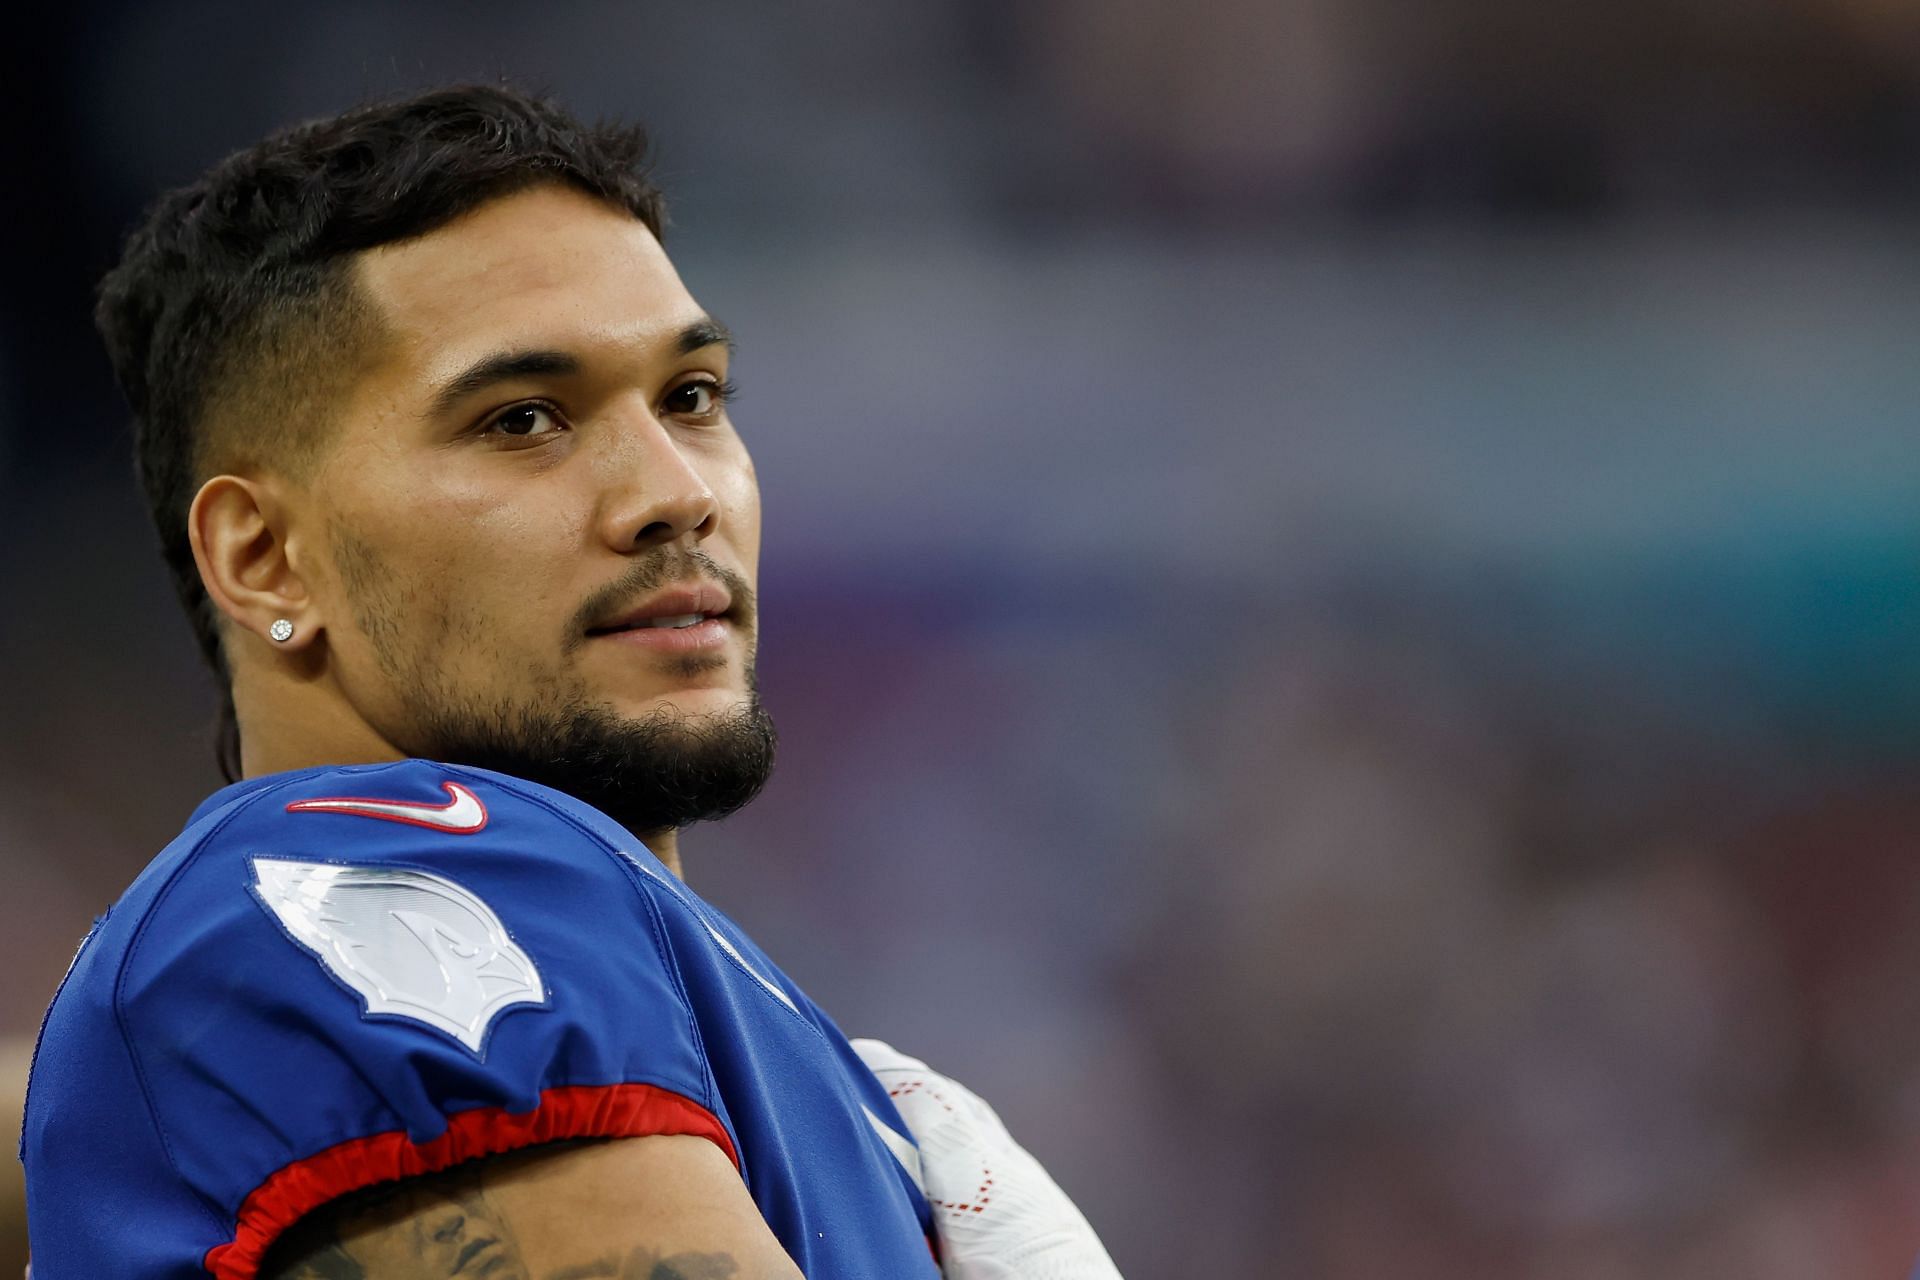 James Conner at the NFL Pro Bowl